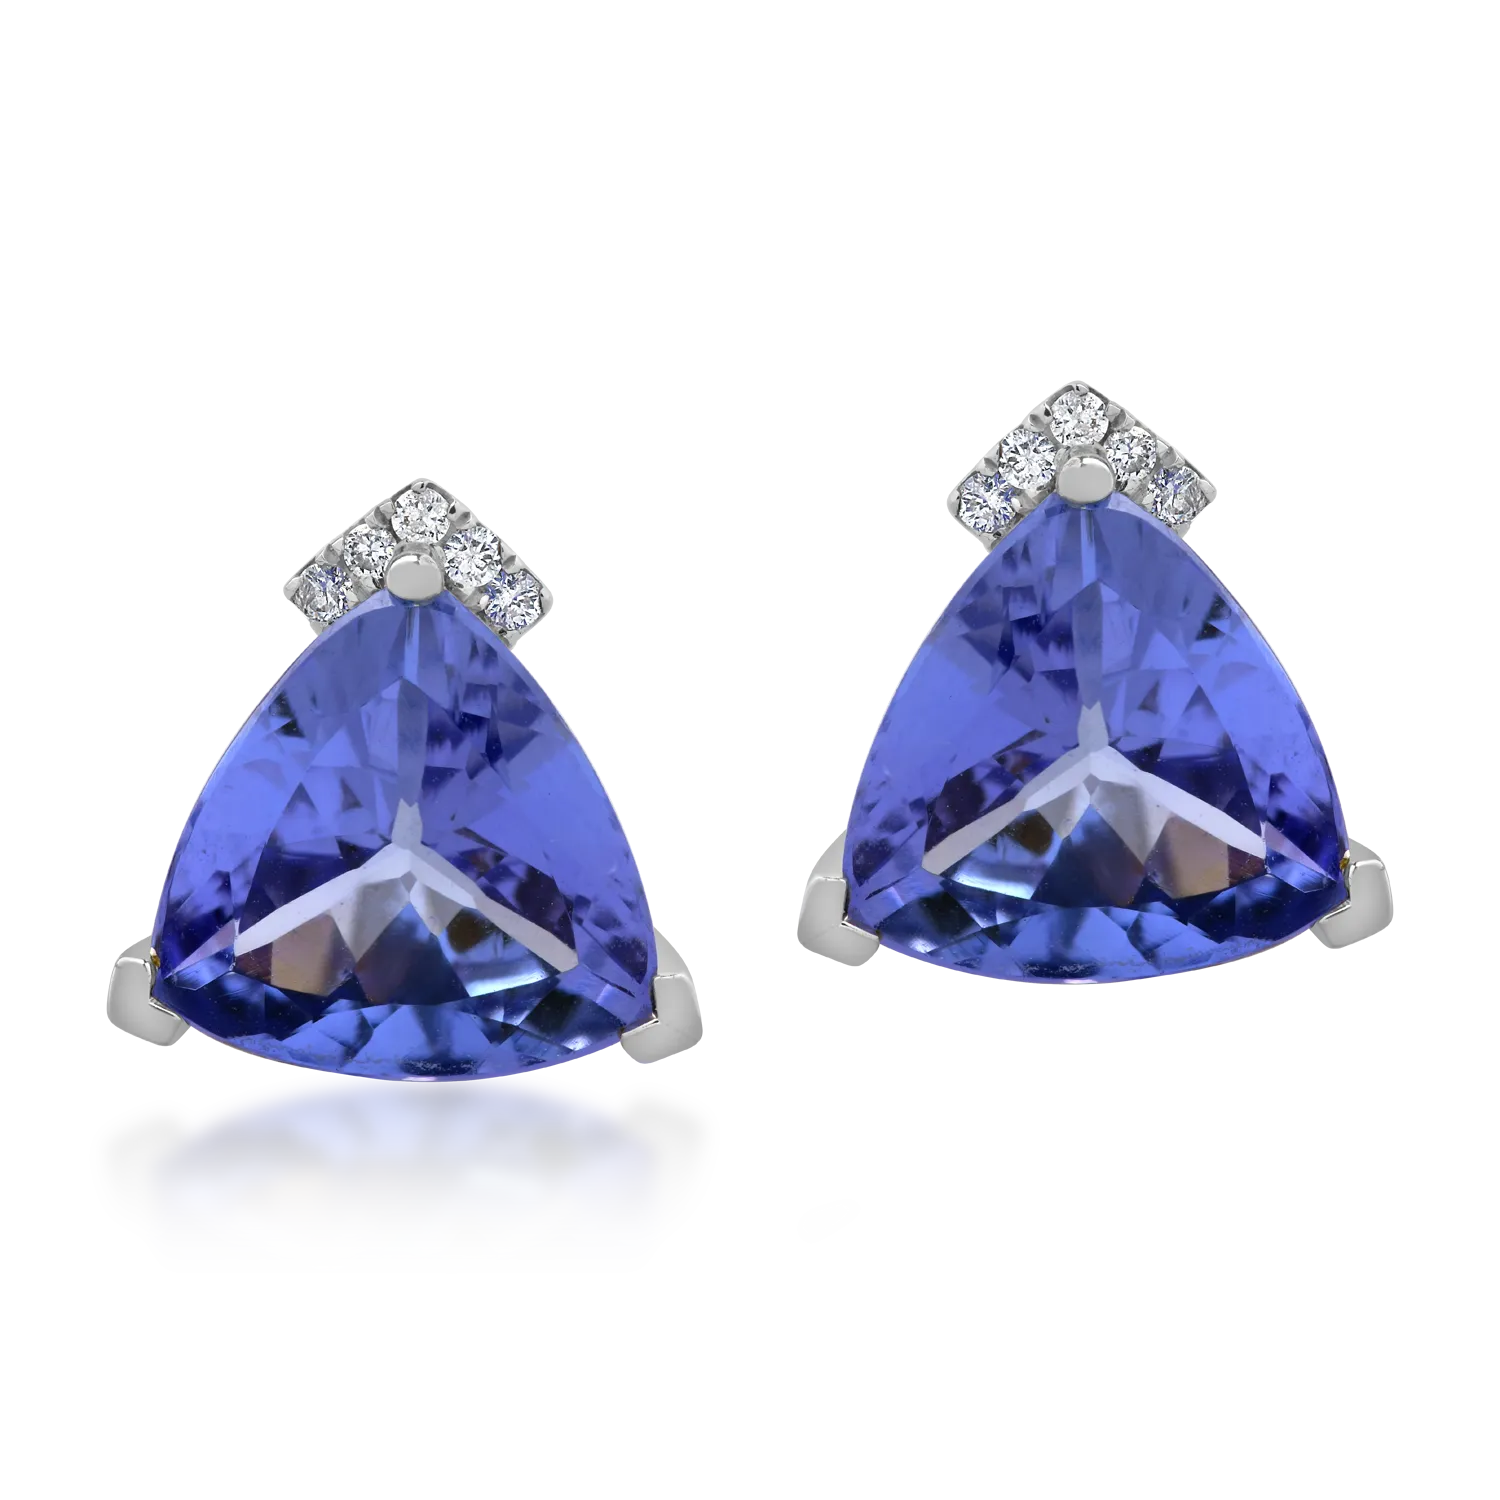 14K white gold earrings with 4.41ct tanzanites and 0.05ct diamonds